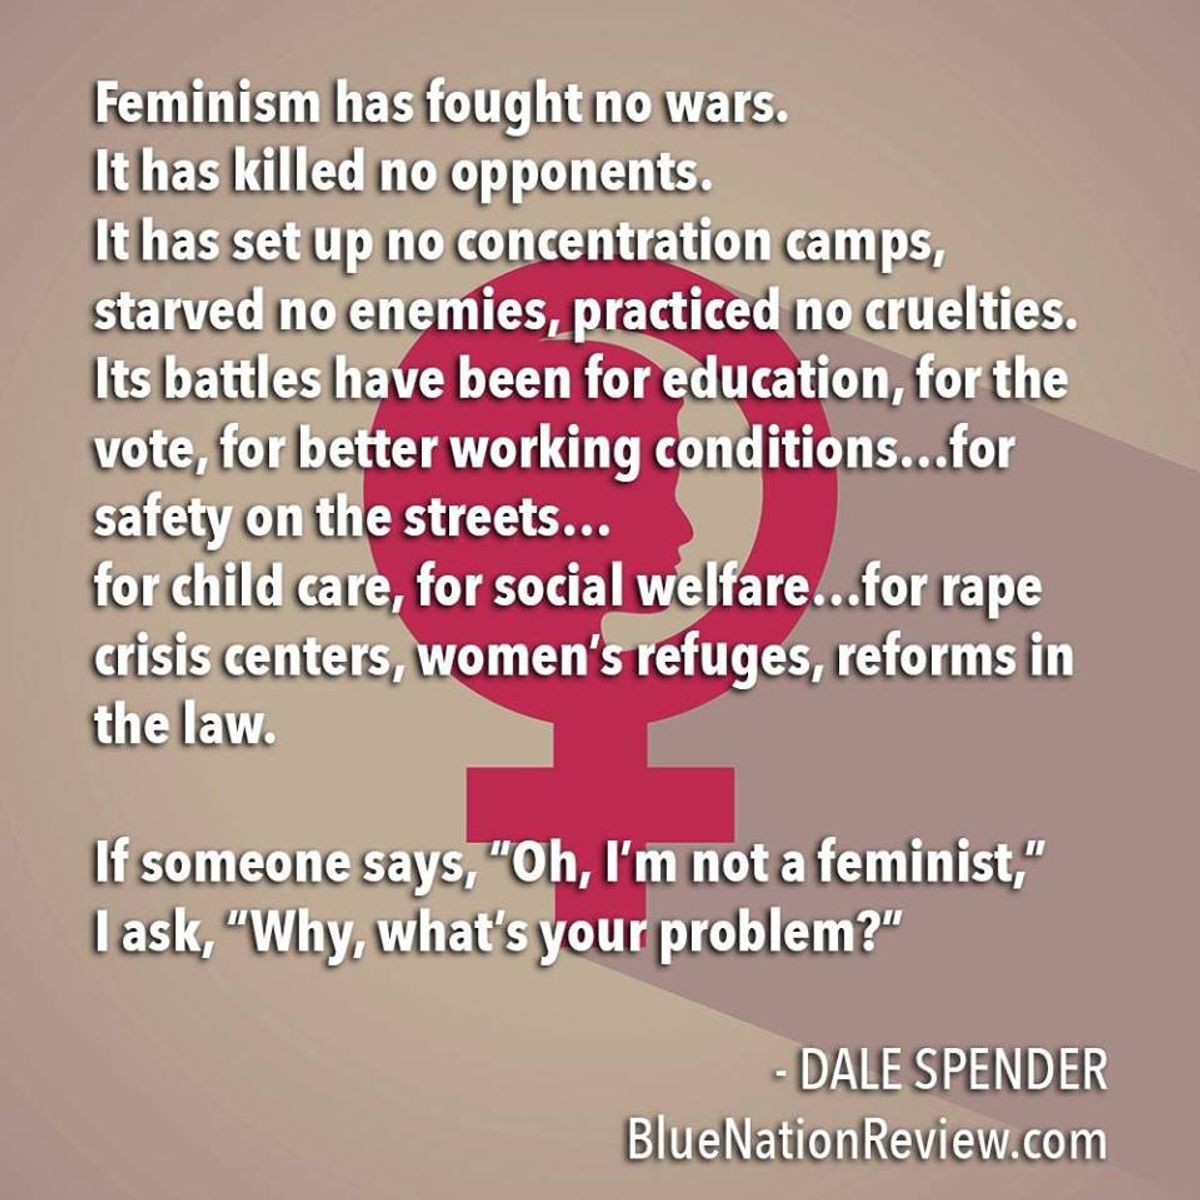 Four Common Misconceptions About Feminism